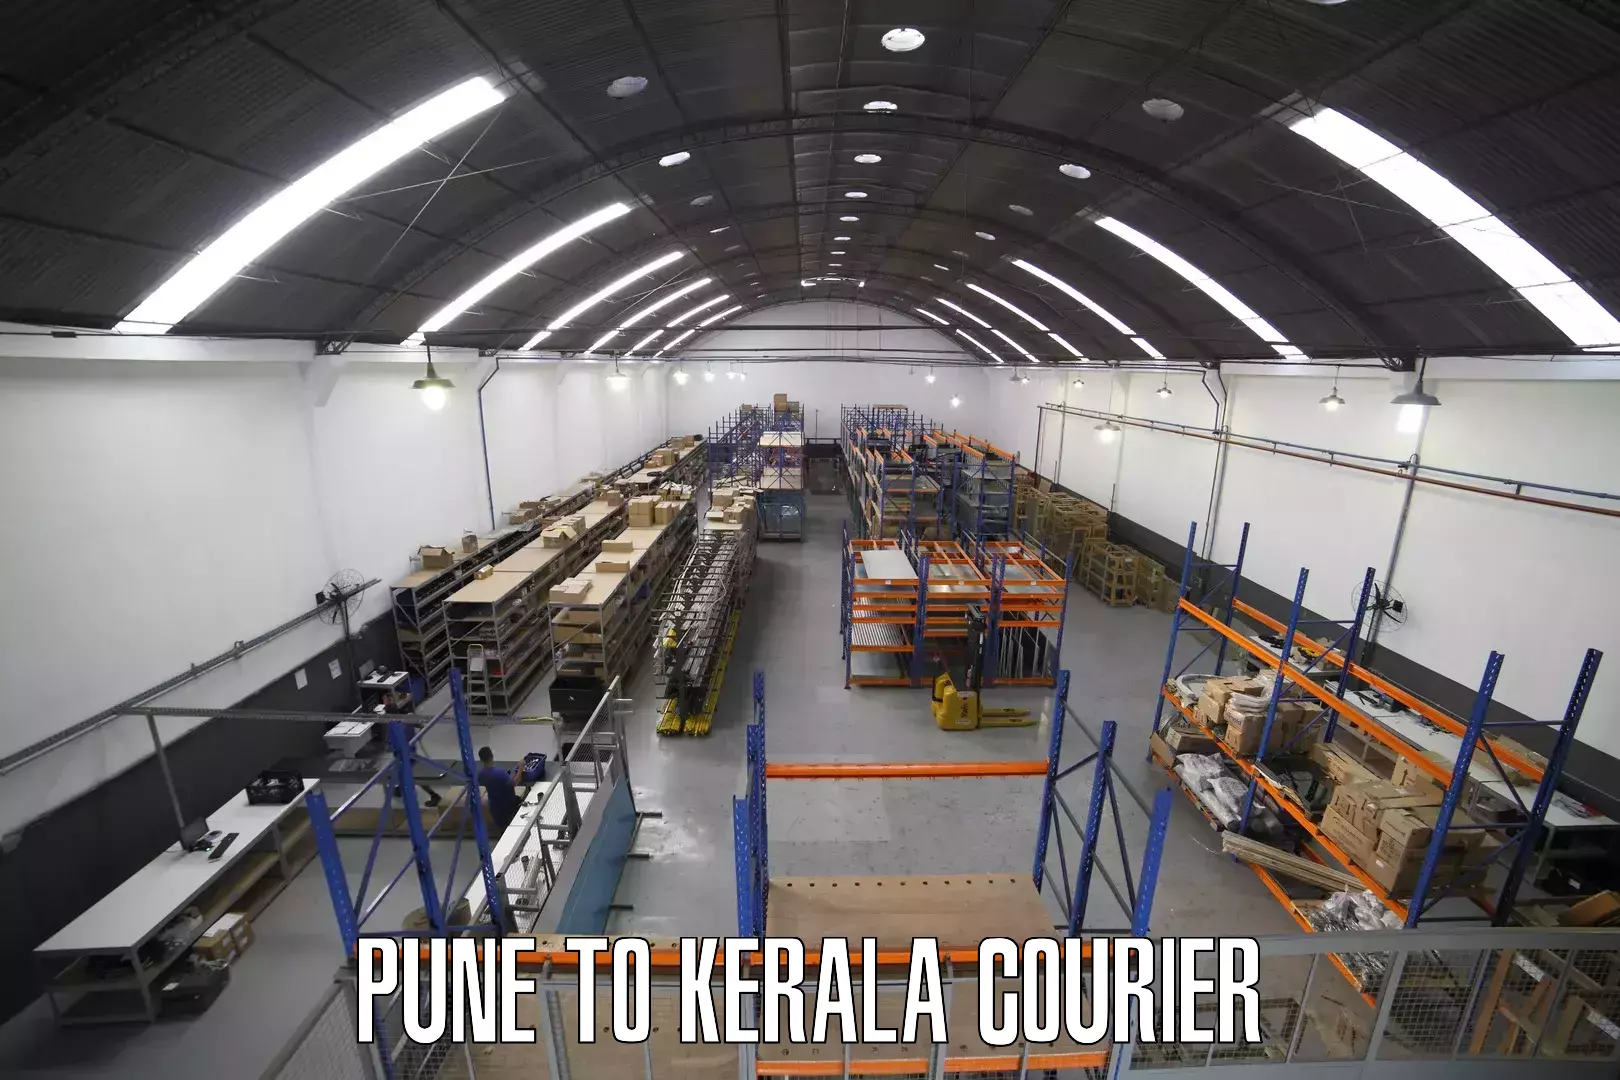 Weekend courier service Pune to Kerala